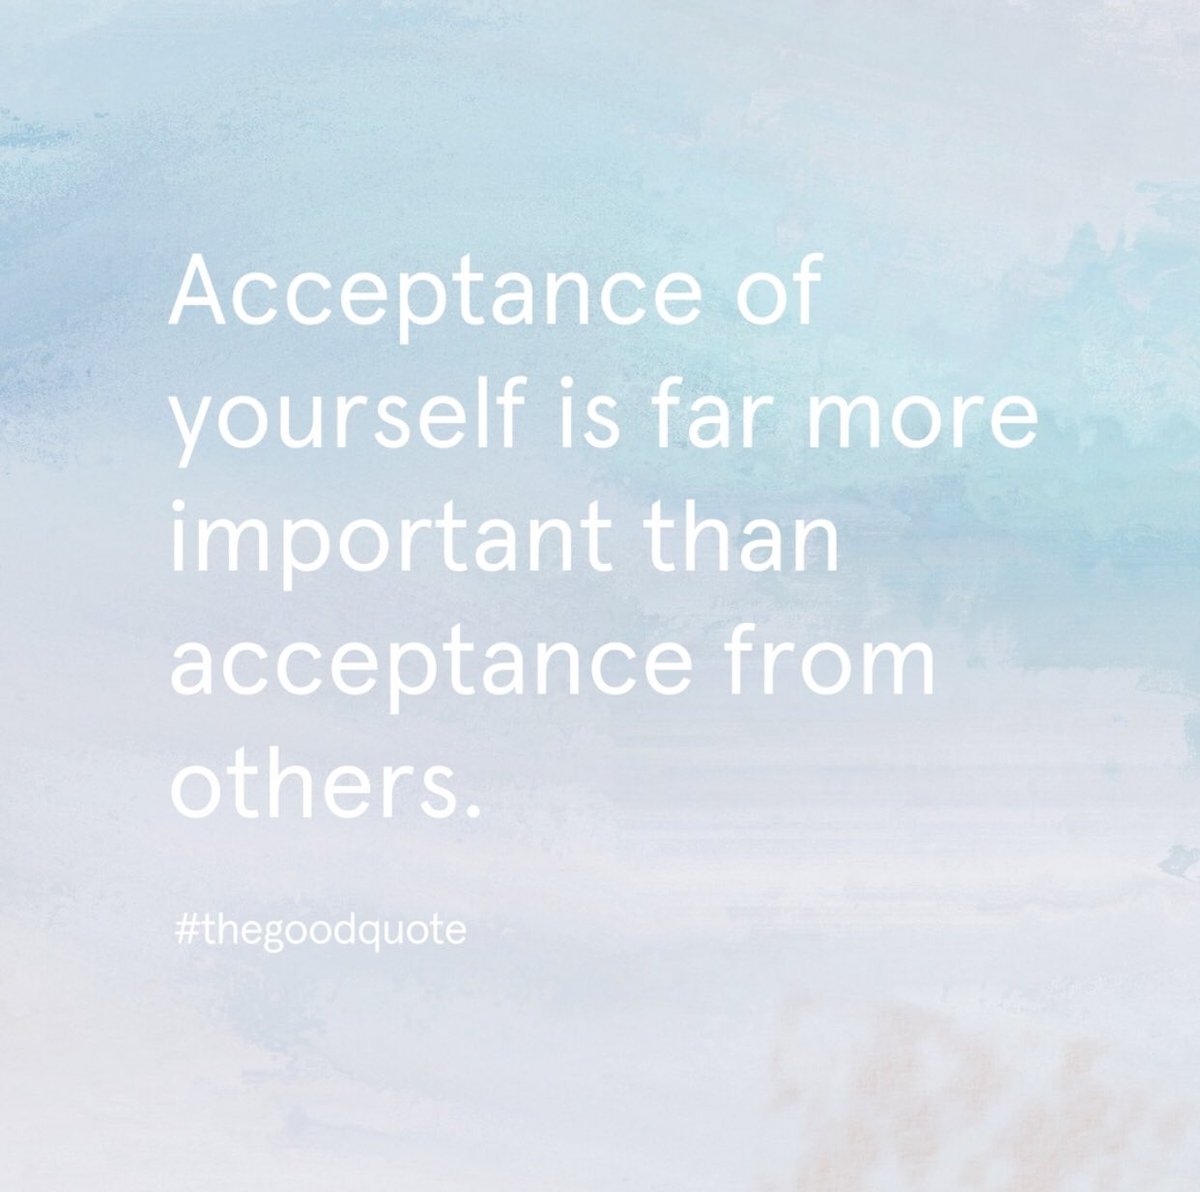 “accept yourself”